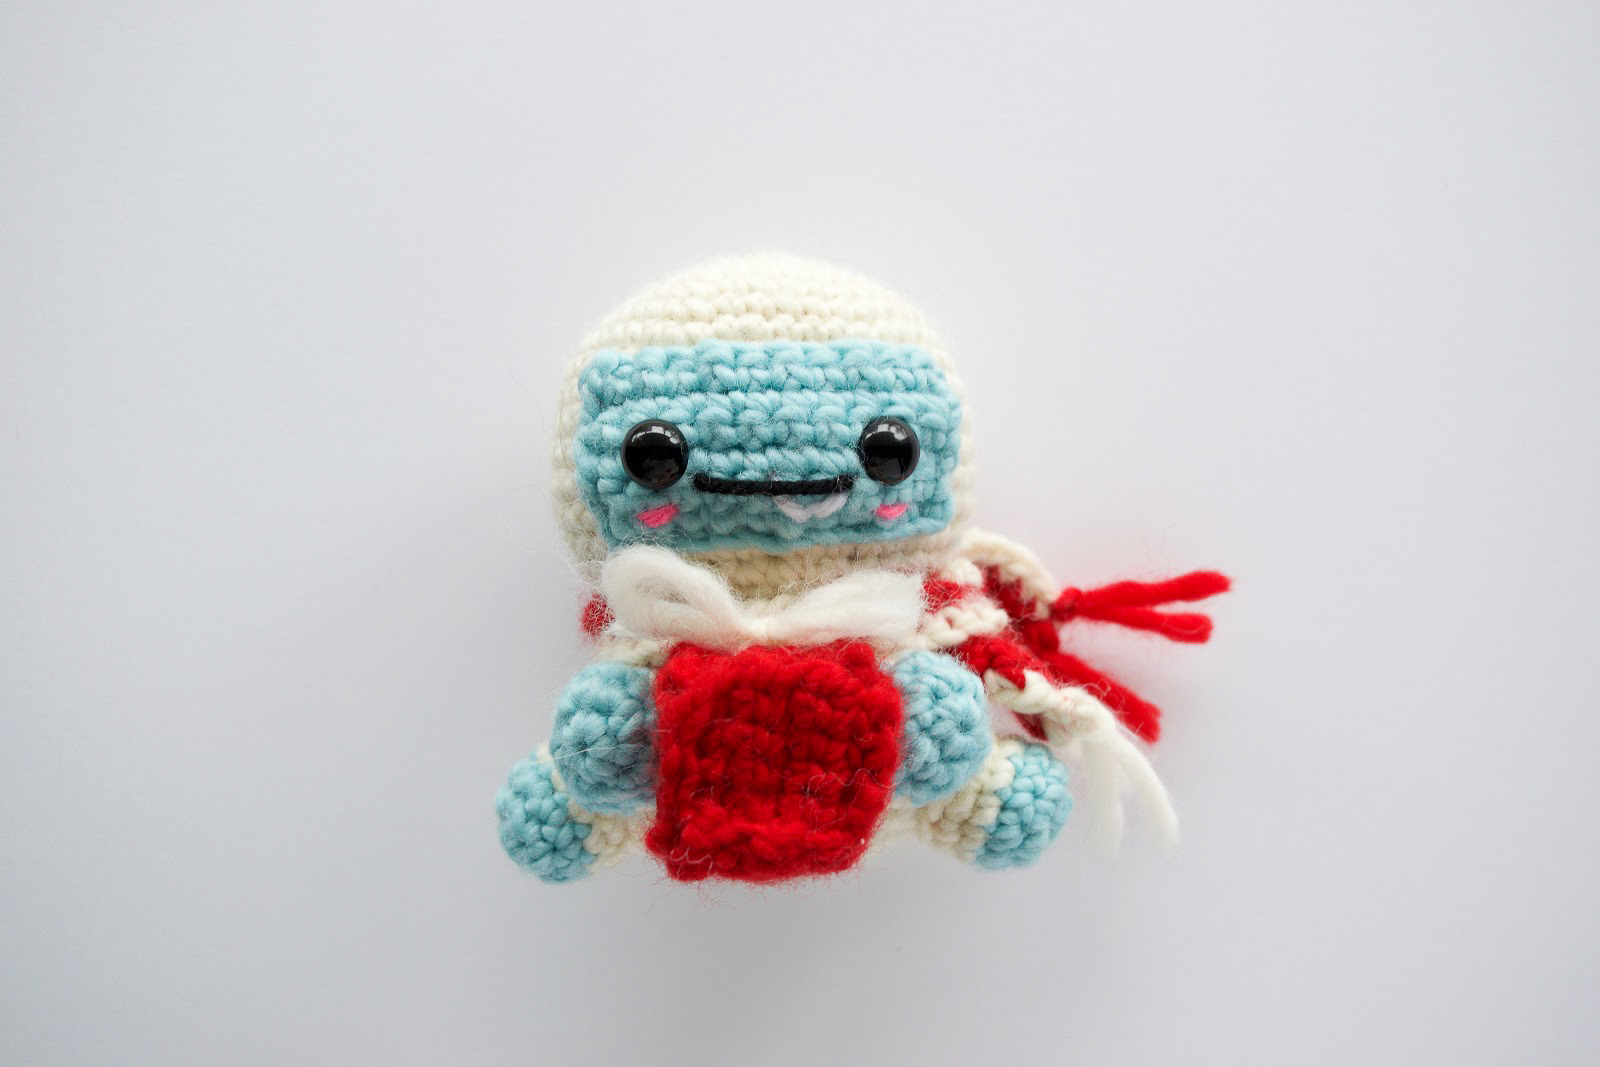 Claus the Yeti - Fill this holiday season with crochet toy projects that will fill your home with more joy than ever before. #crochettoys #christmastoys #crochetamigurumi